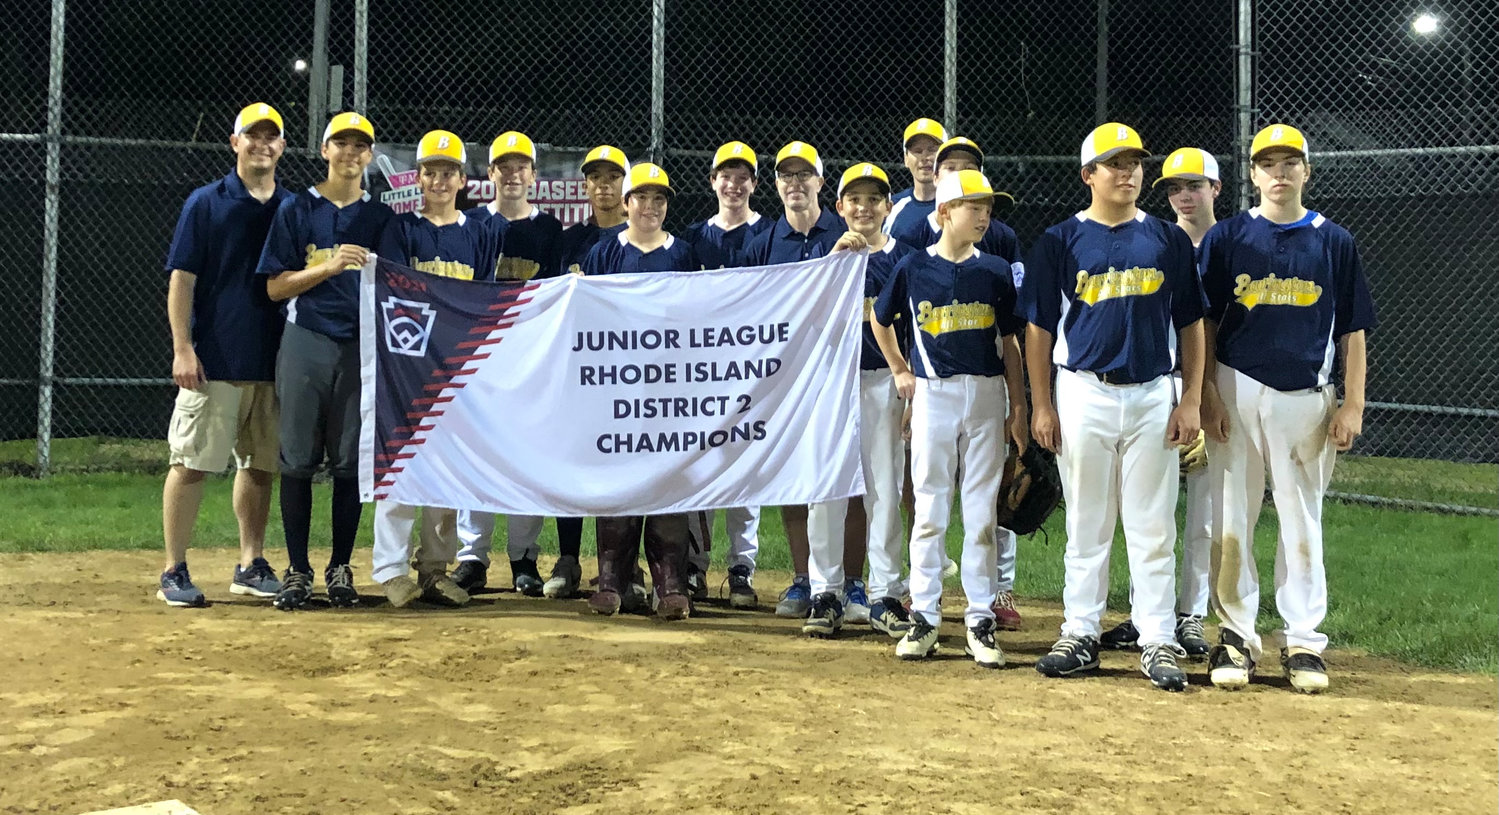 Members of the Barrington Junior Division All-Star baseball team pose with the District 2 championship banner after defeating Pineview on Sunday night.